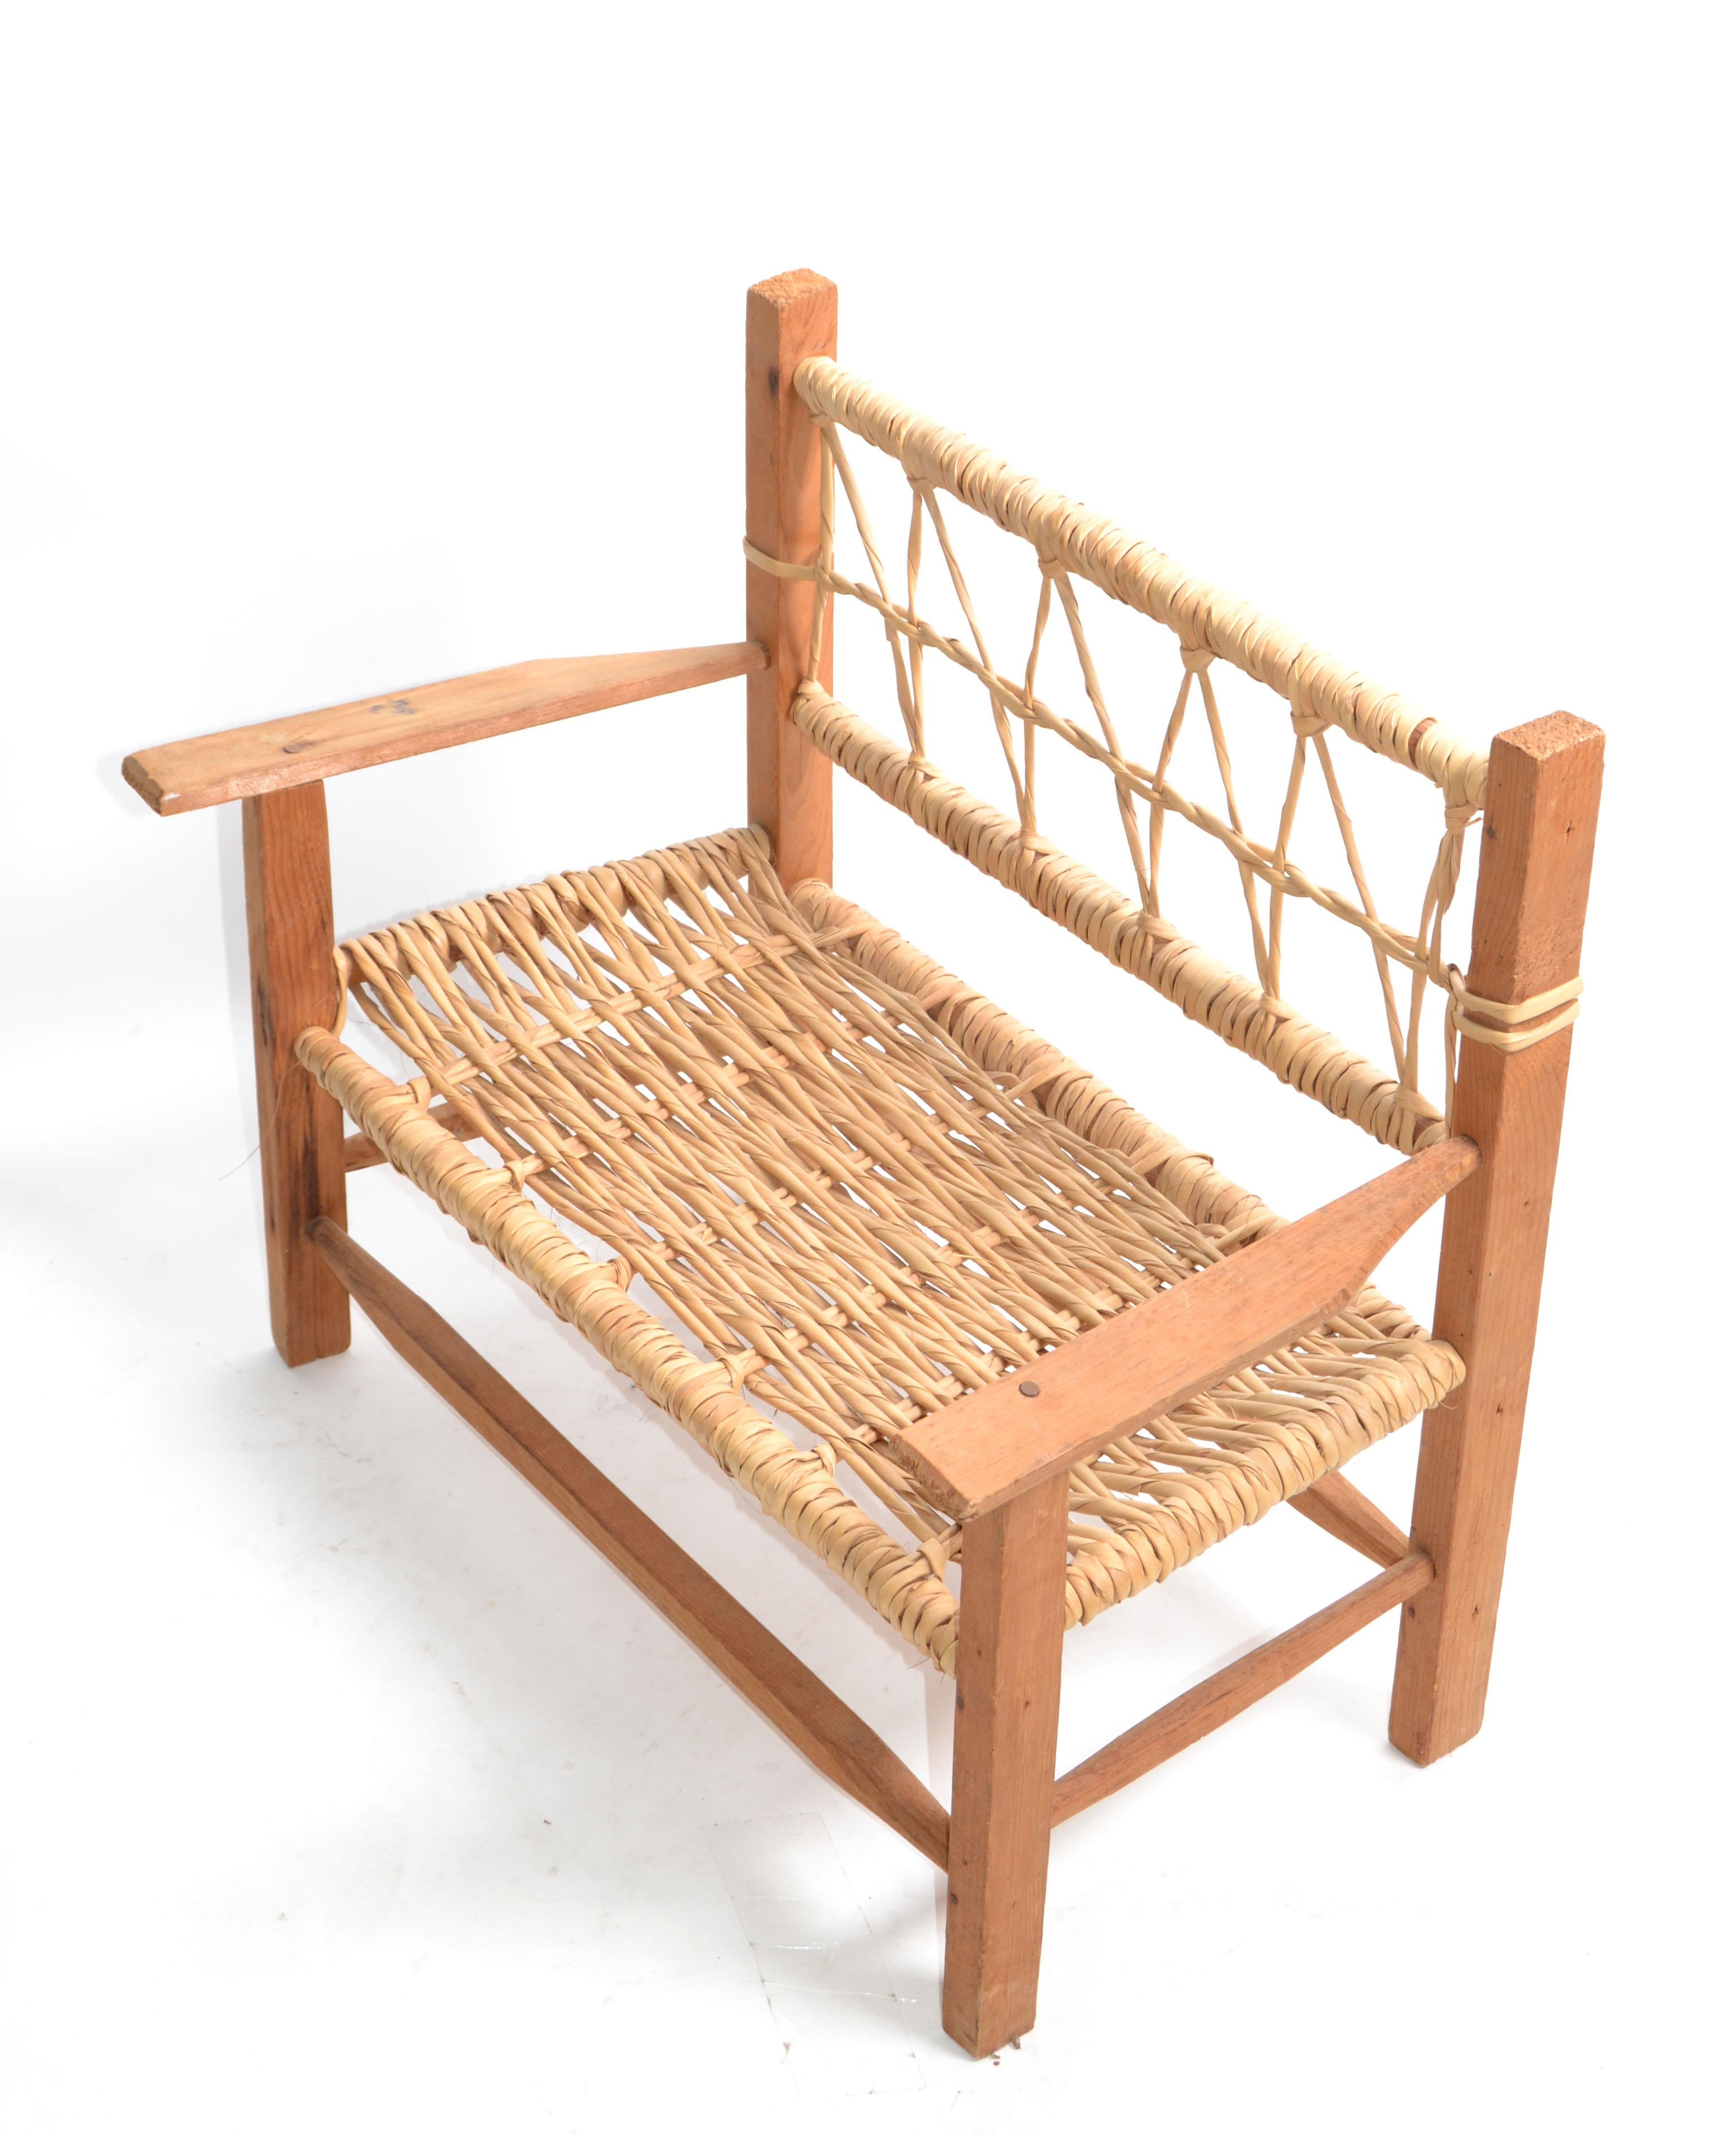 American Mid-Century Modern Woodworking & Cane Handwoven Doll, Teddy Bear Bench  For Sale 1